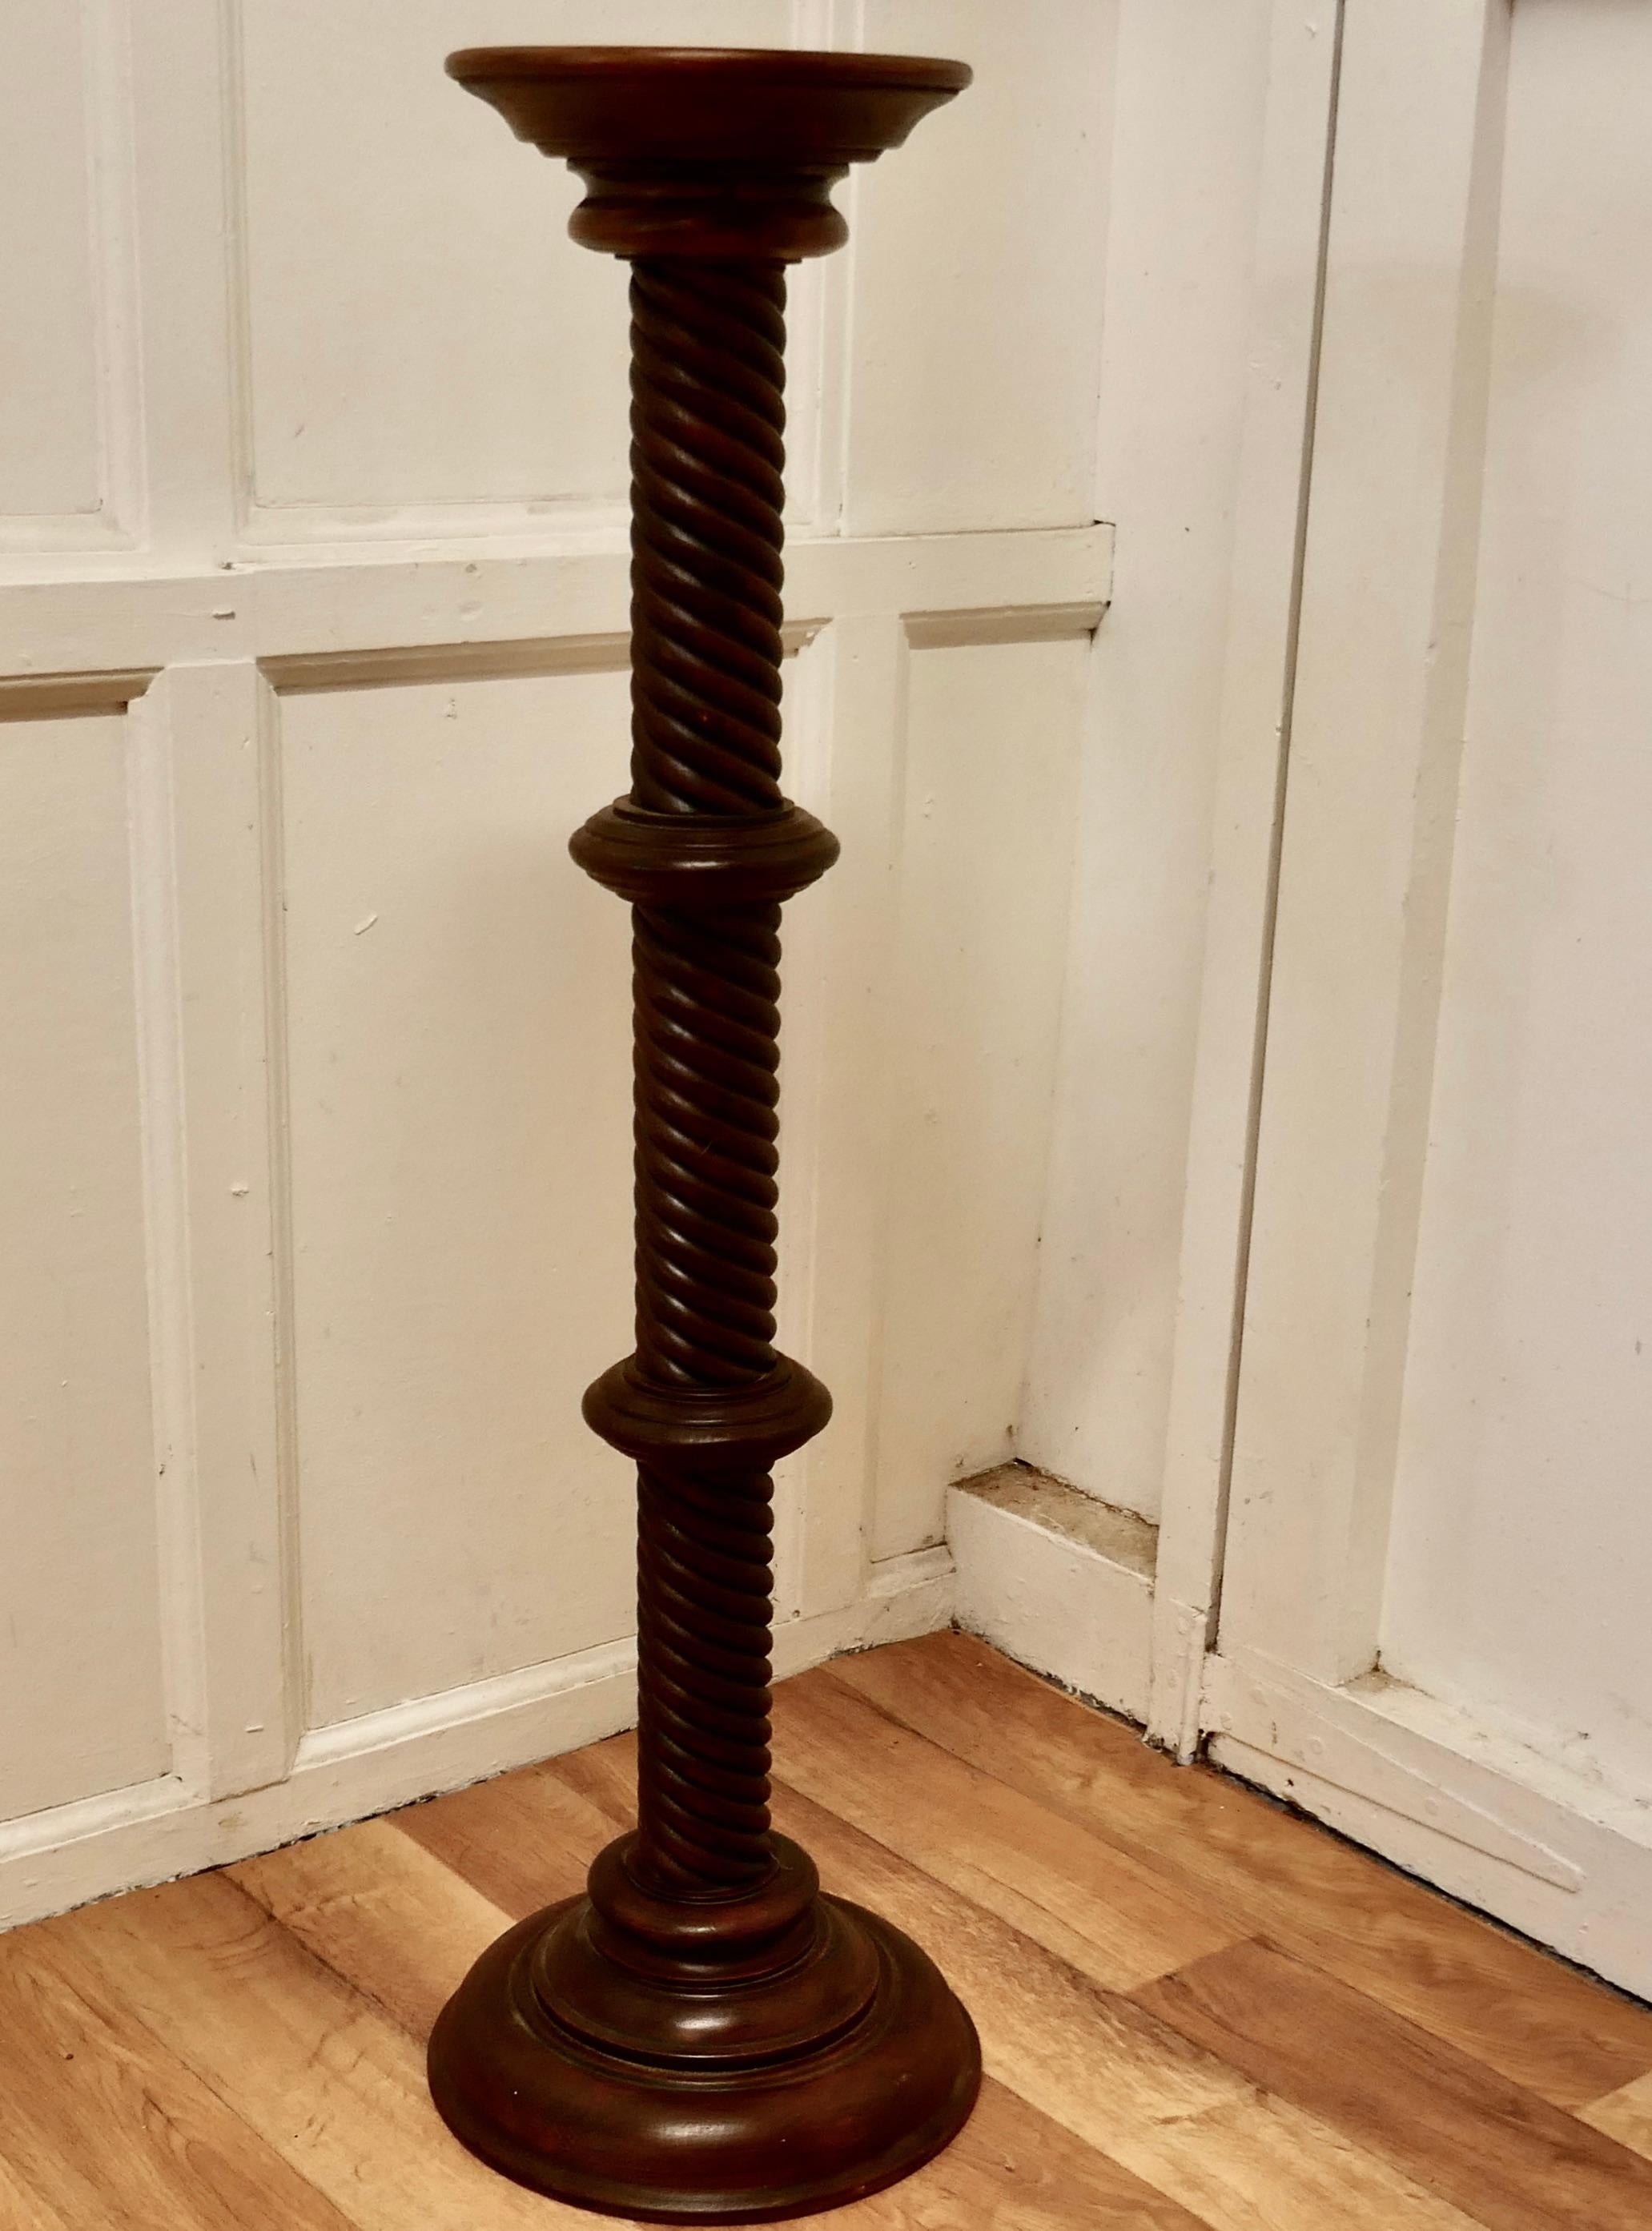 19th century carved mahogany pedestal torchere

The column has a tight barley twist turning, both top and bottom are round, the top has a small lip and the base is stepped 
The Column is in the Classical style and has a multitude of uses, for a